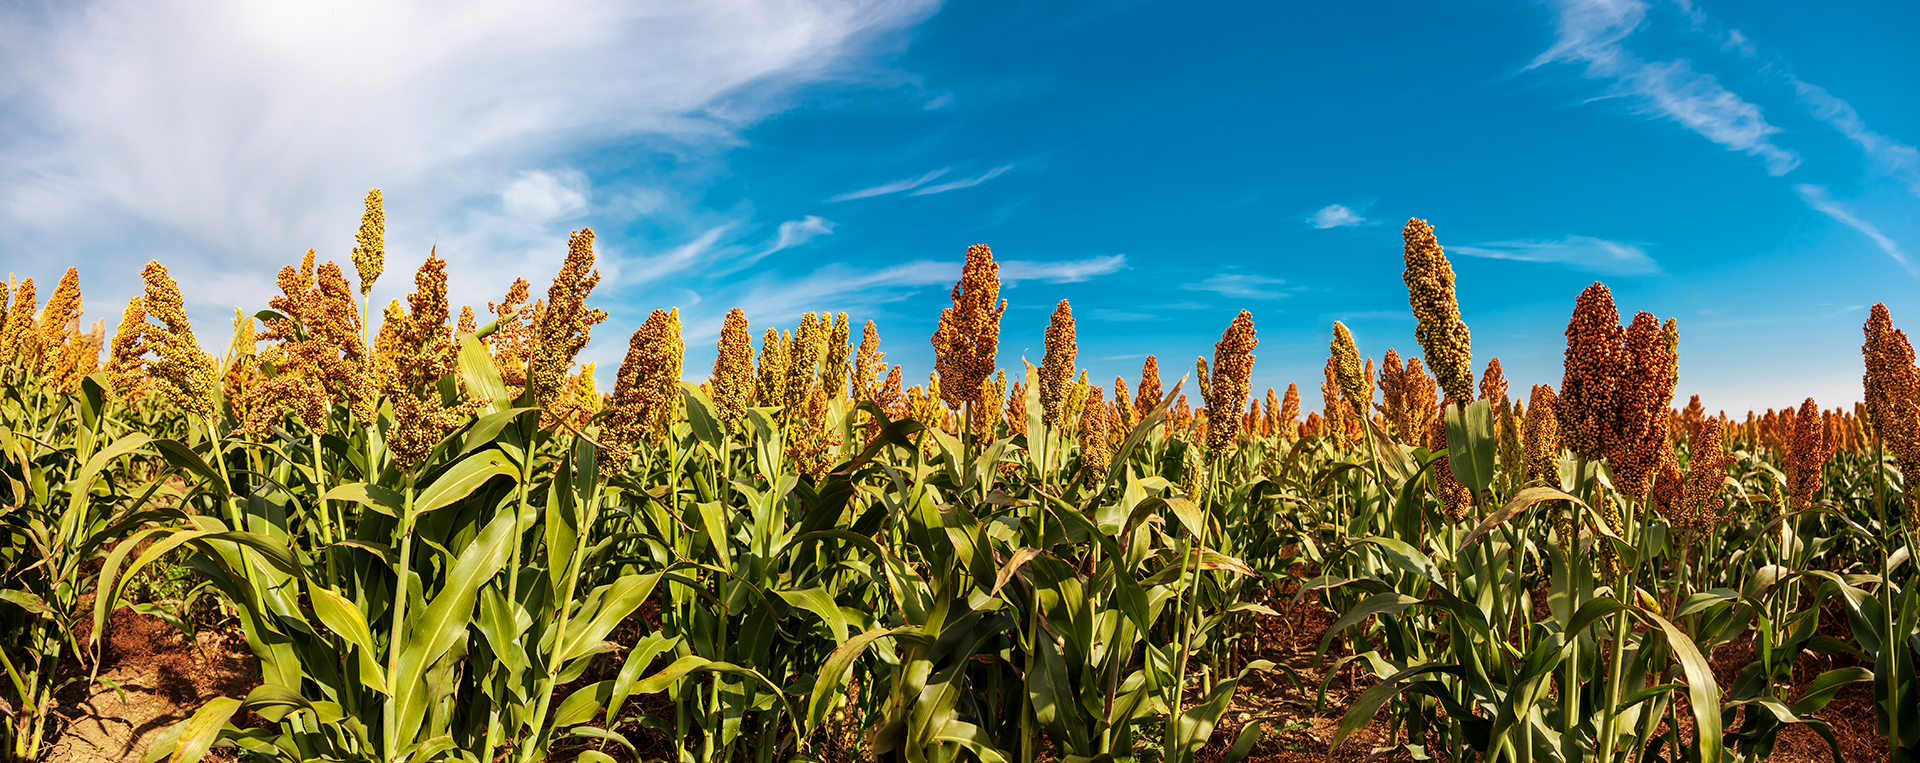 sorghum field with blue sky in background